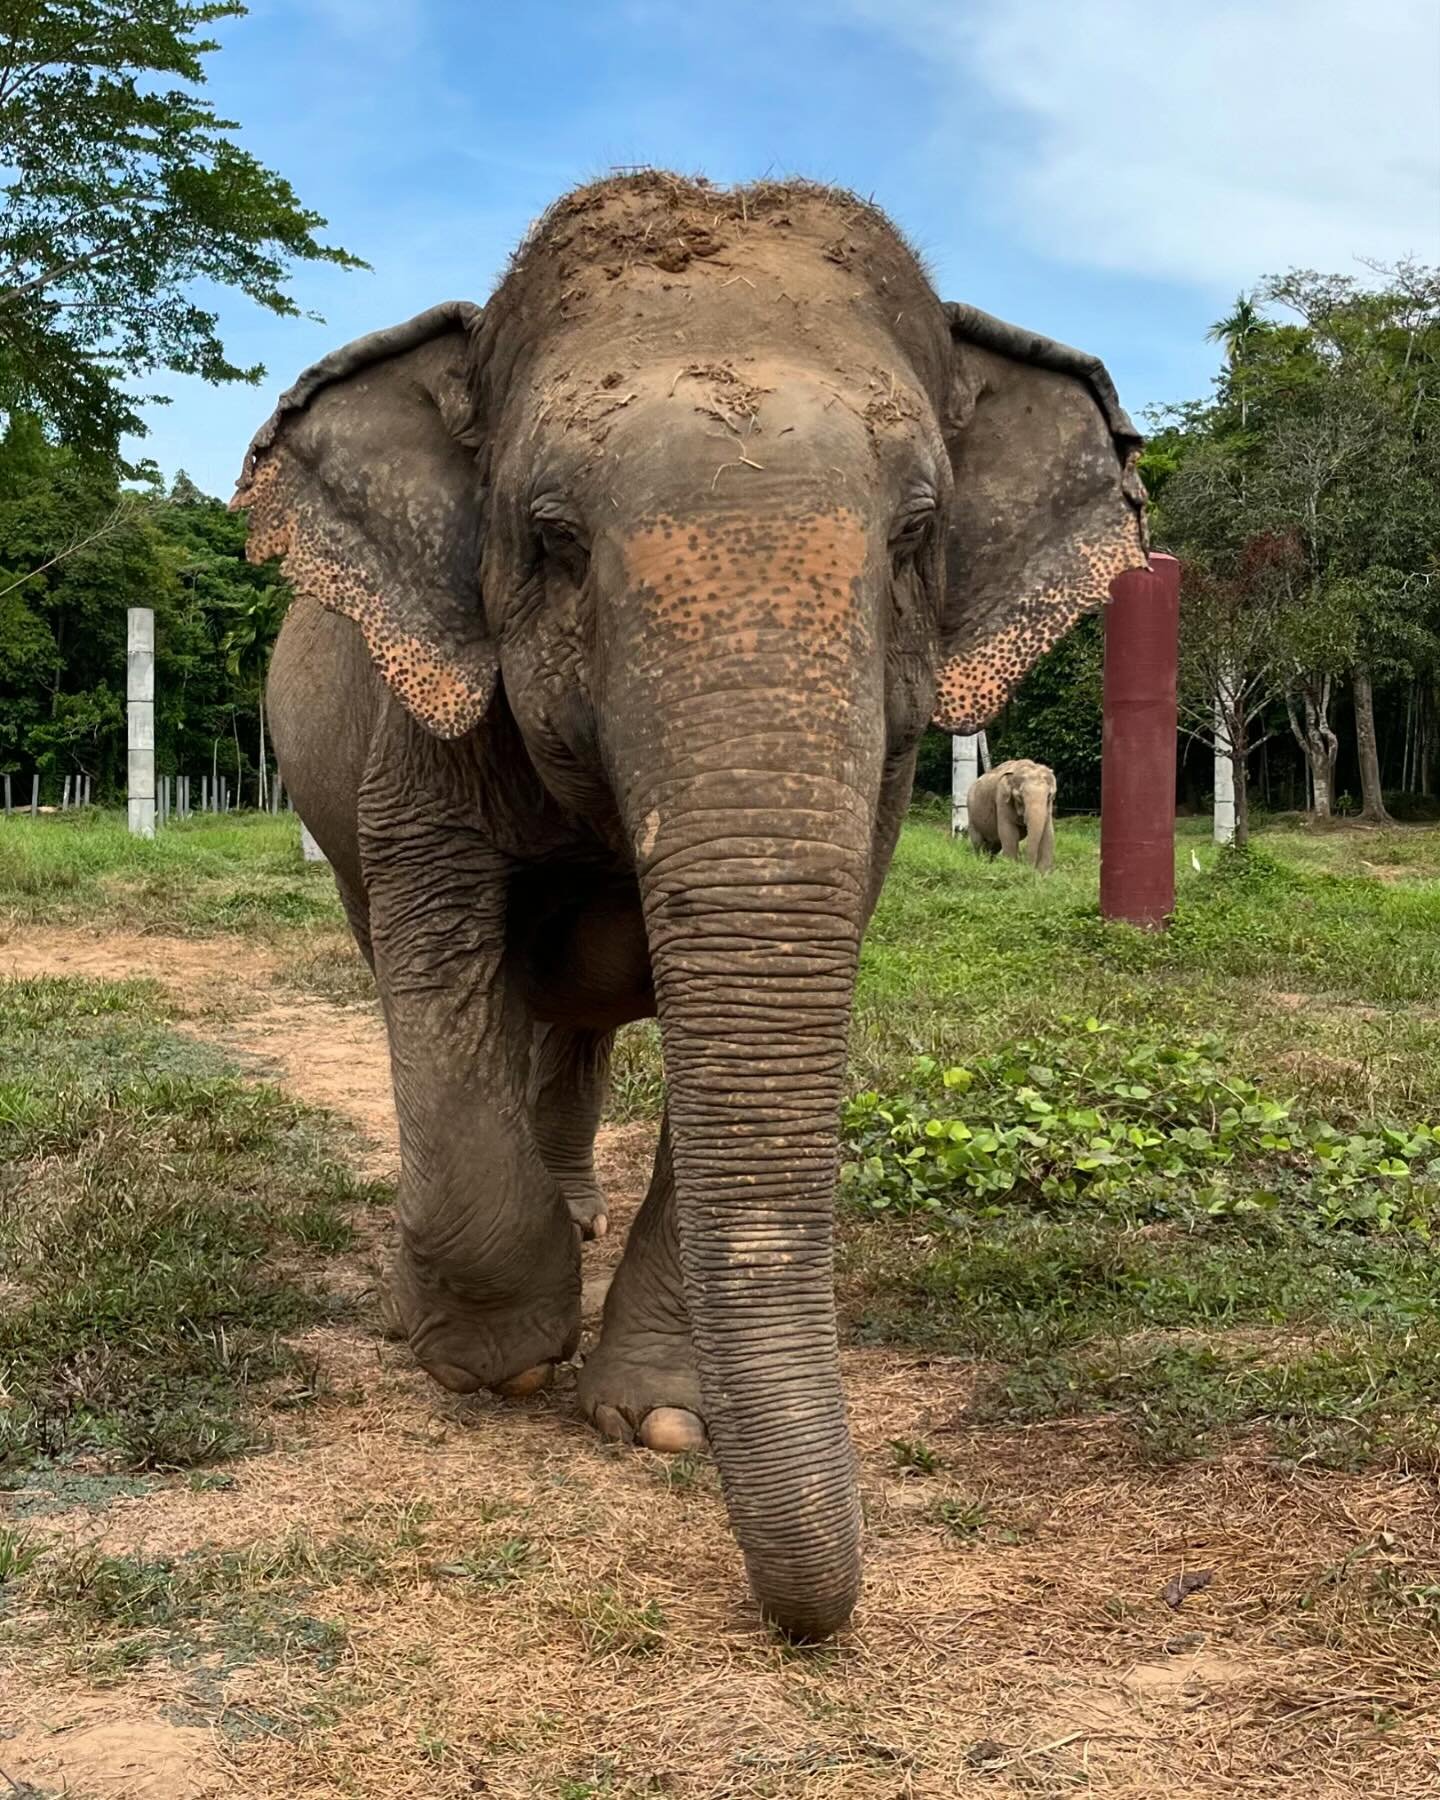 My eldest son, Jonathan, took this photo whilst at an elephant sanctuary in Phuket, Thailand - he knows I love elephants. 

In many cultures, the elephant symbolizes good luck, power, wisdom, loyalty and protection. I love their sensitivity too and r